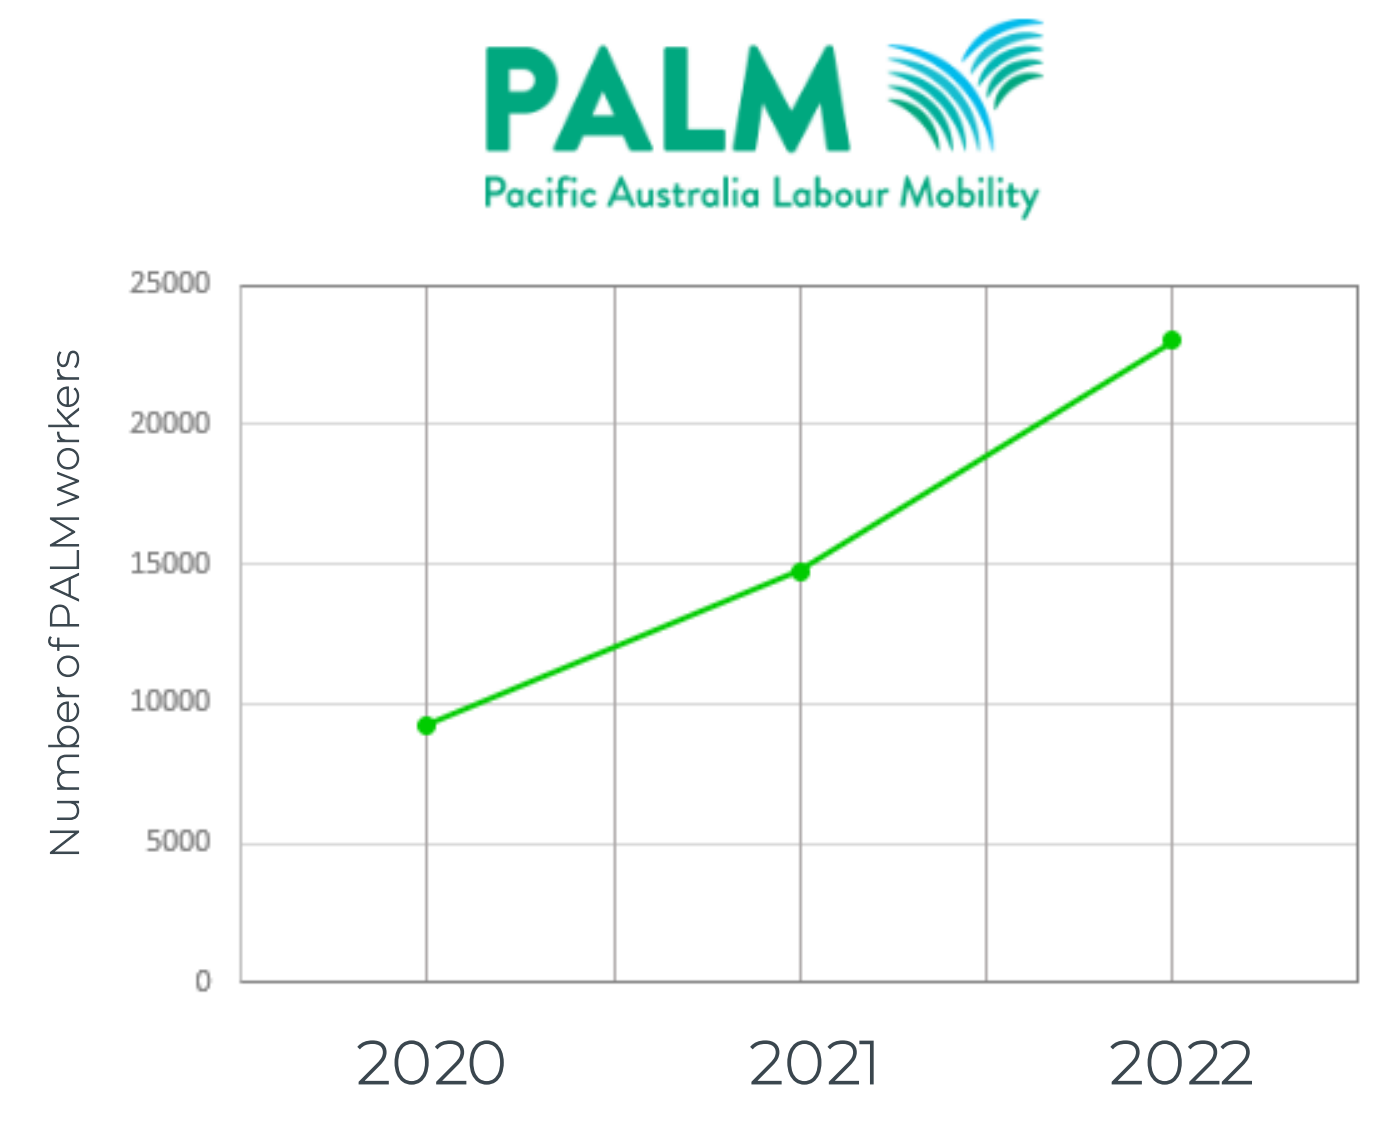 (Source: PeopleIN) A snapshot of PALM migration workforce recovery since early 2020 